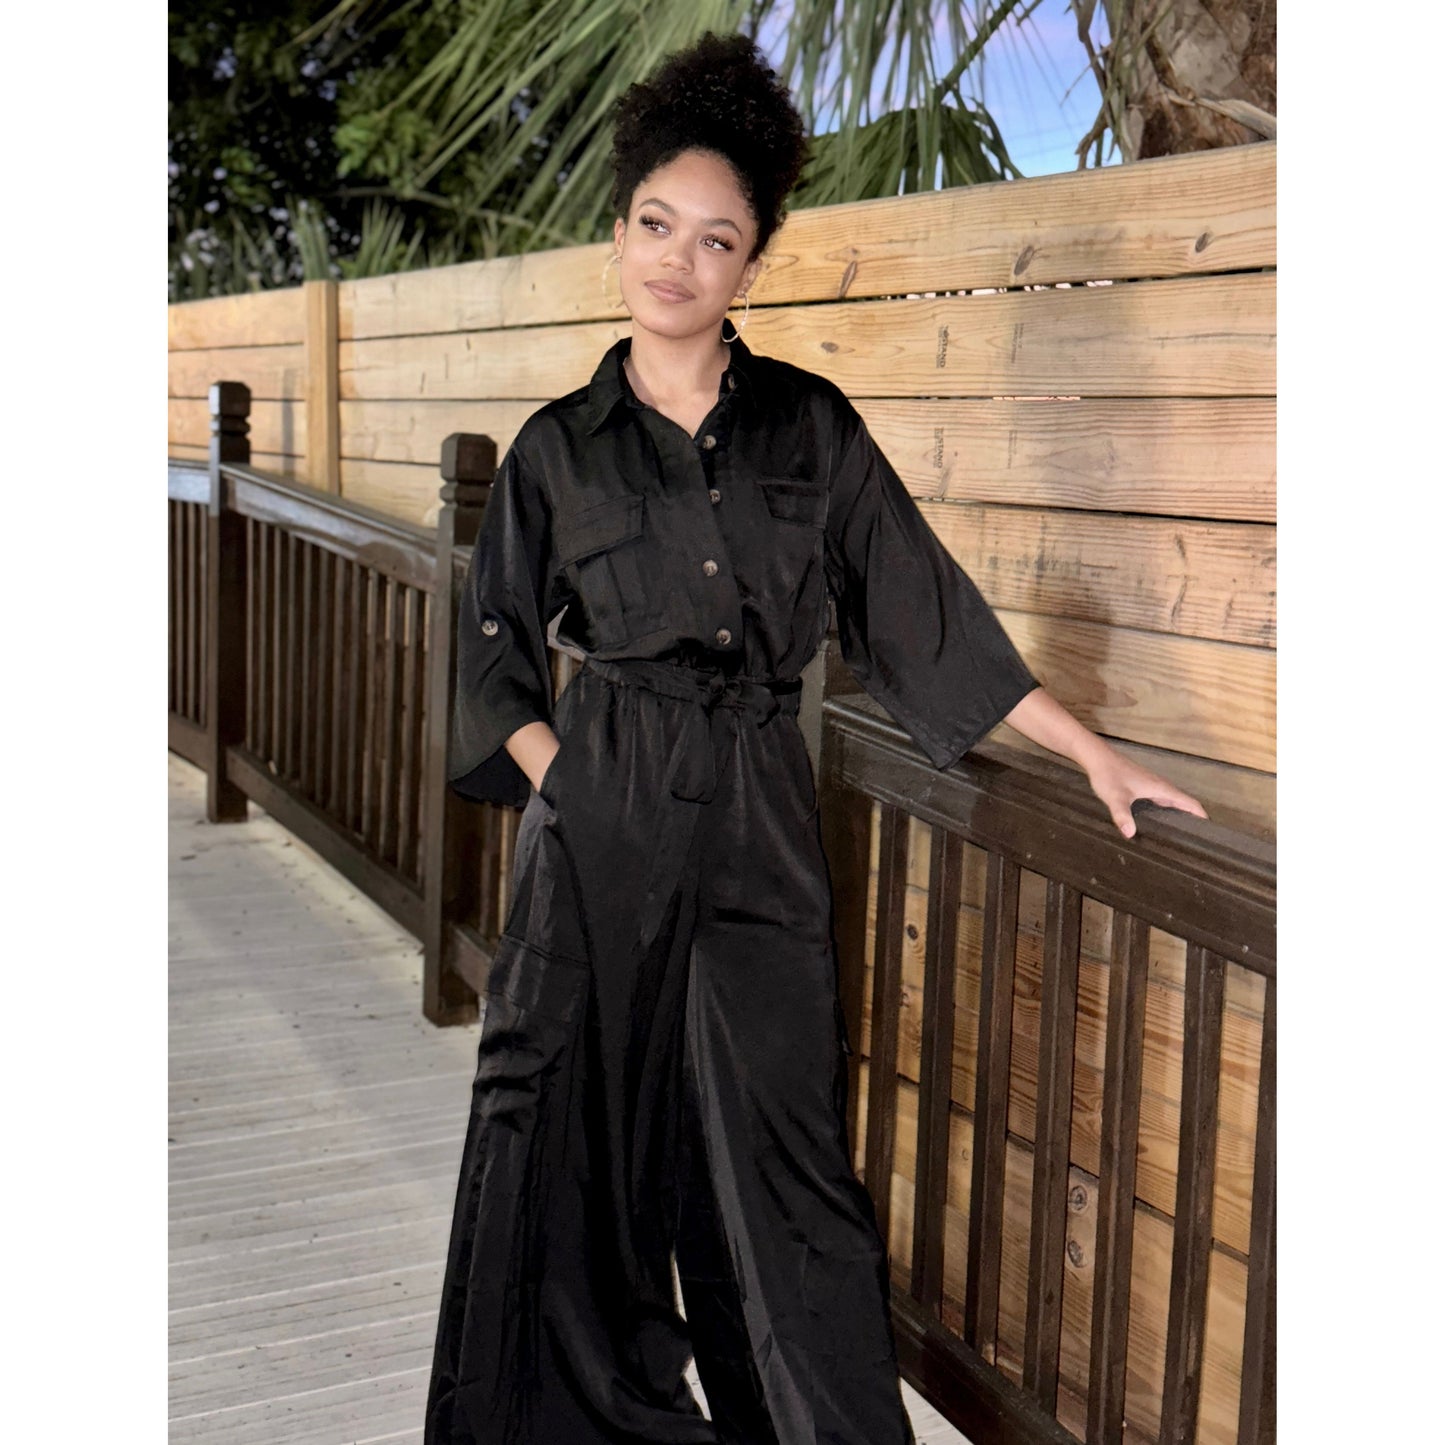 Everyday Chic jumpsuit